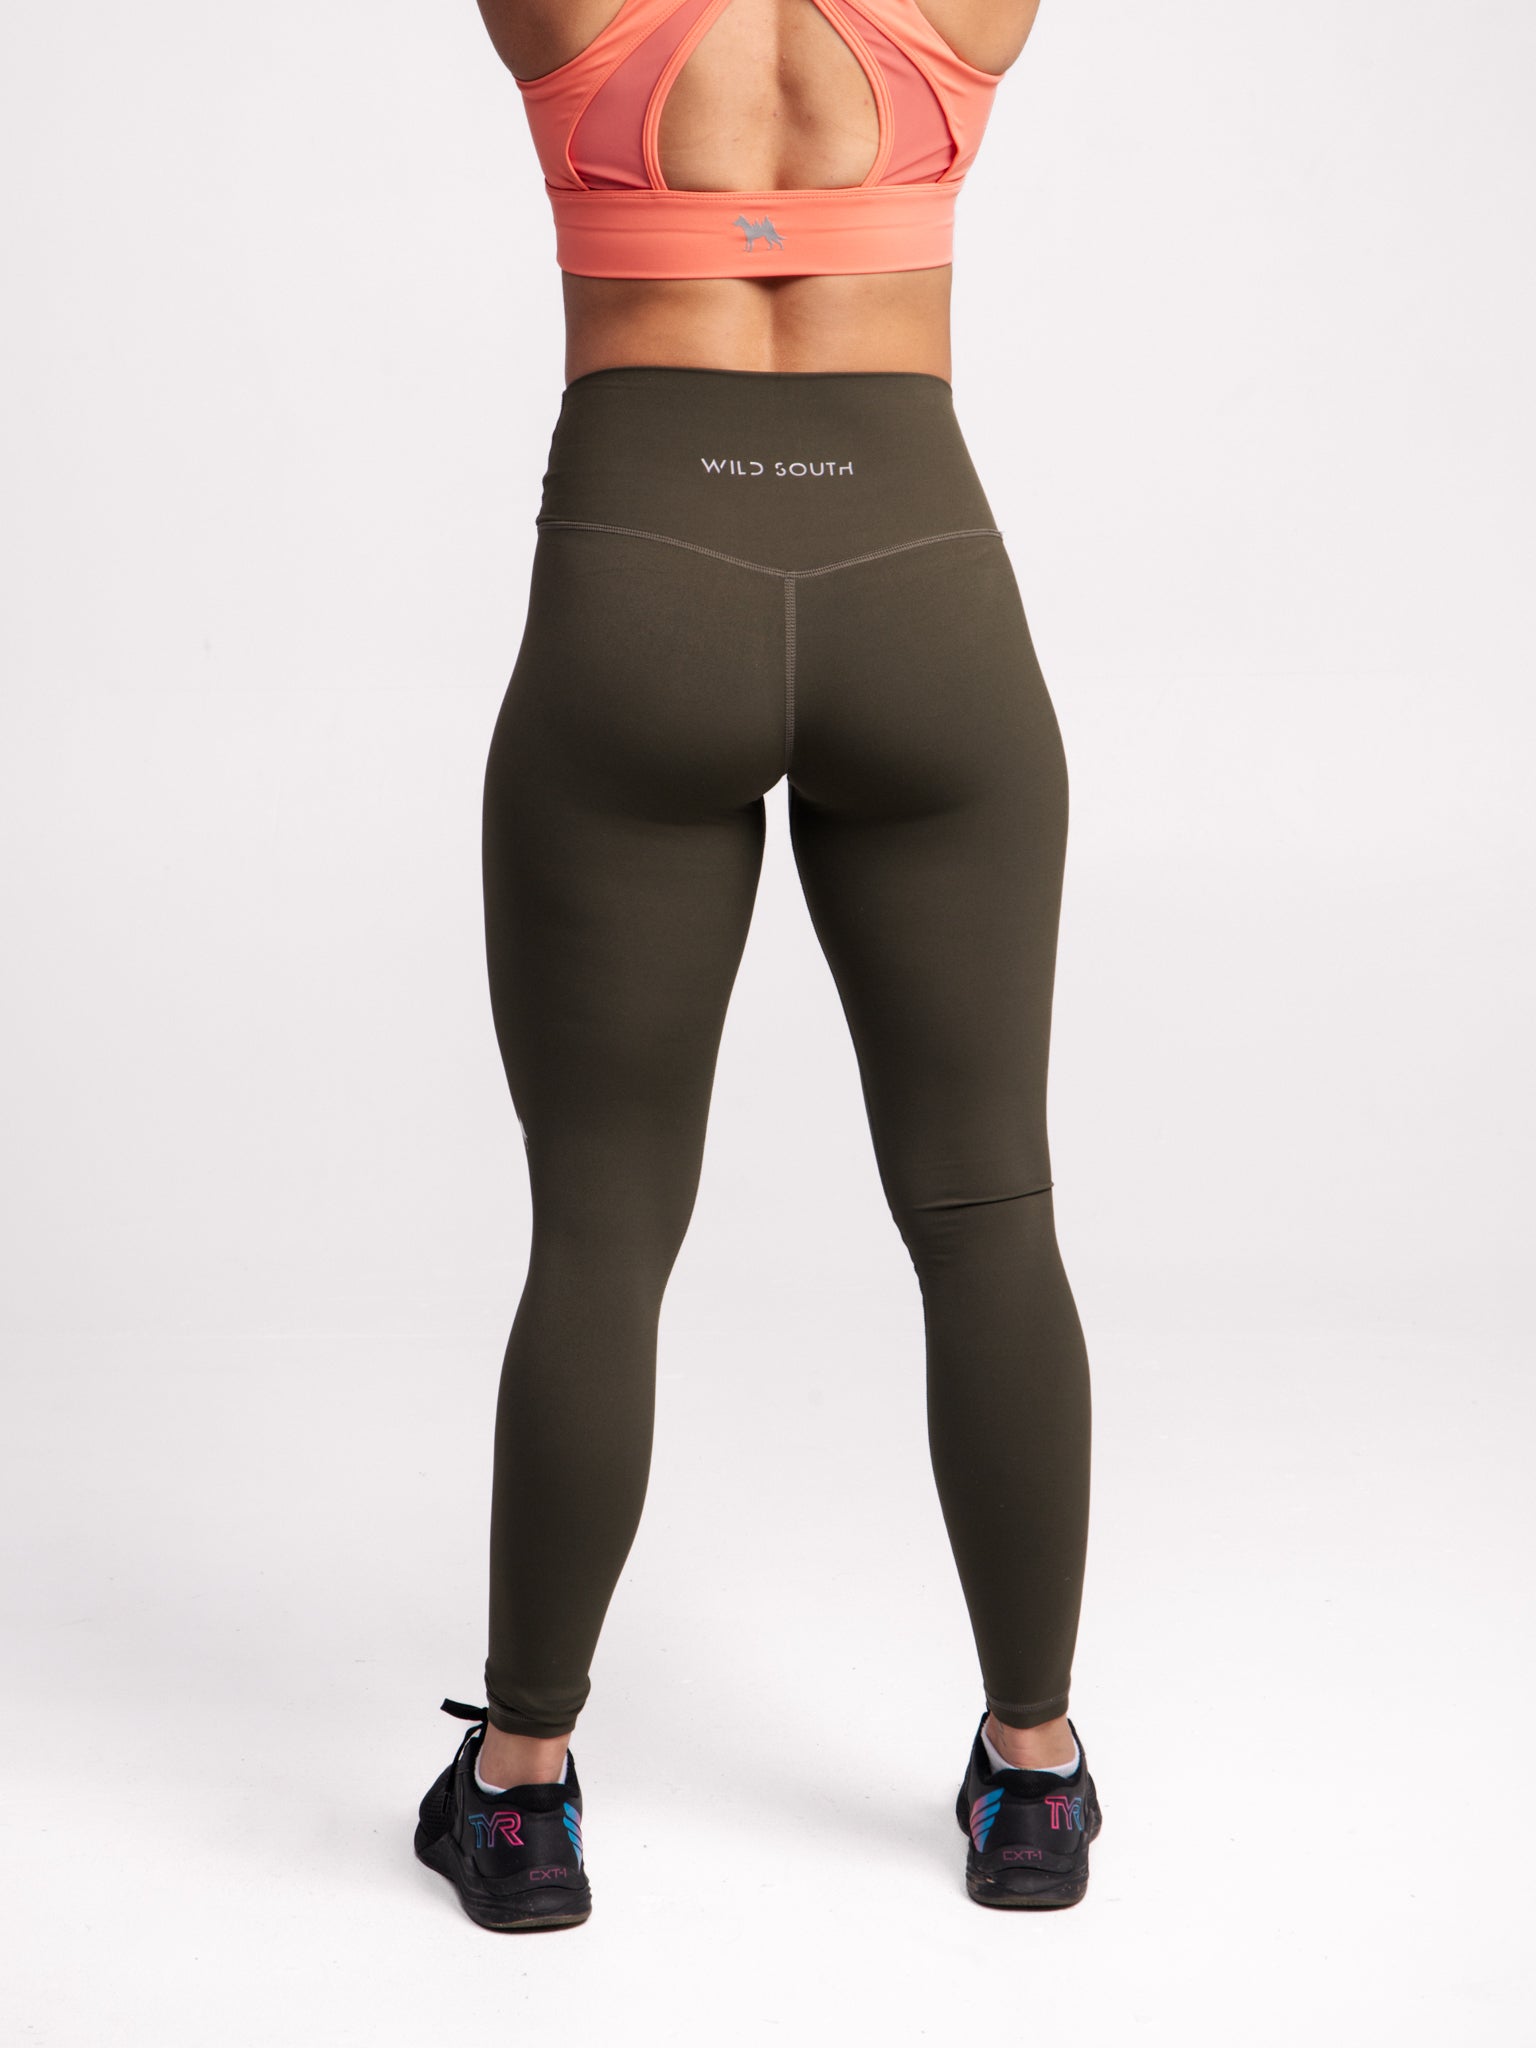 Women Legging Sets, Wild About You